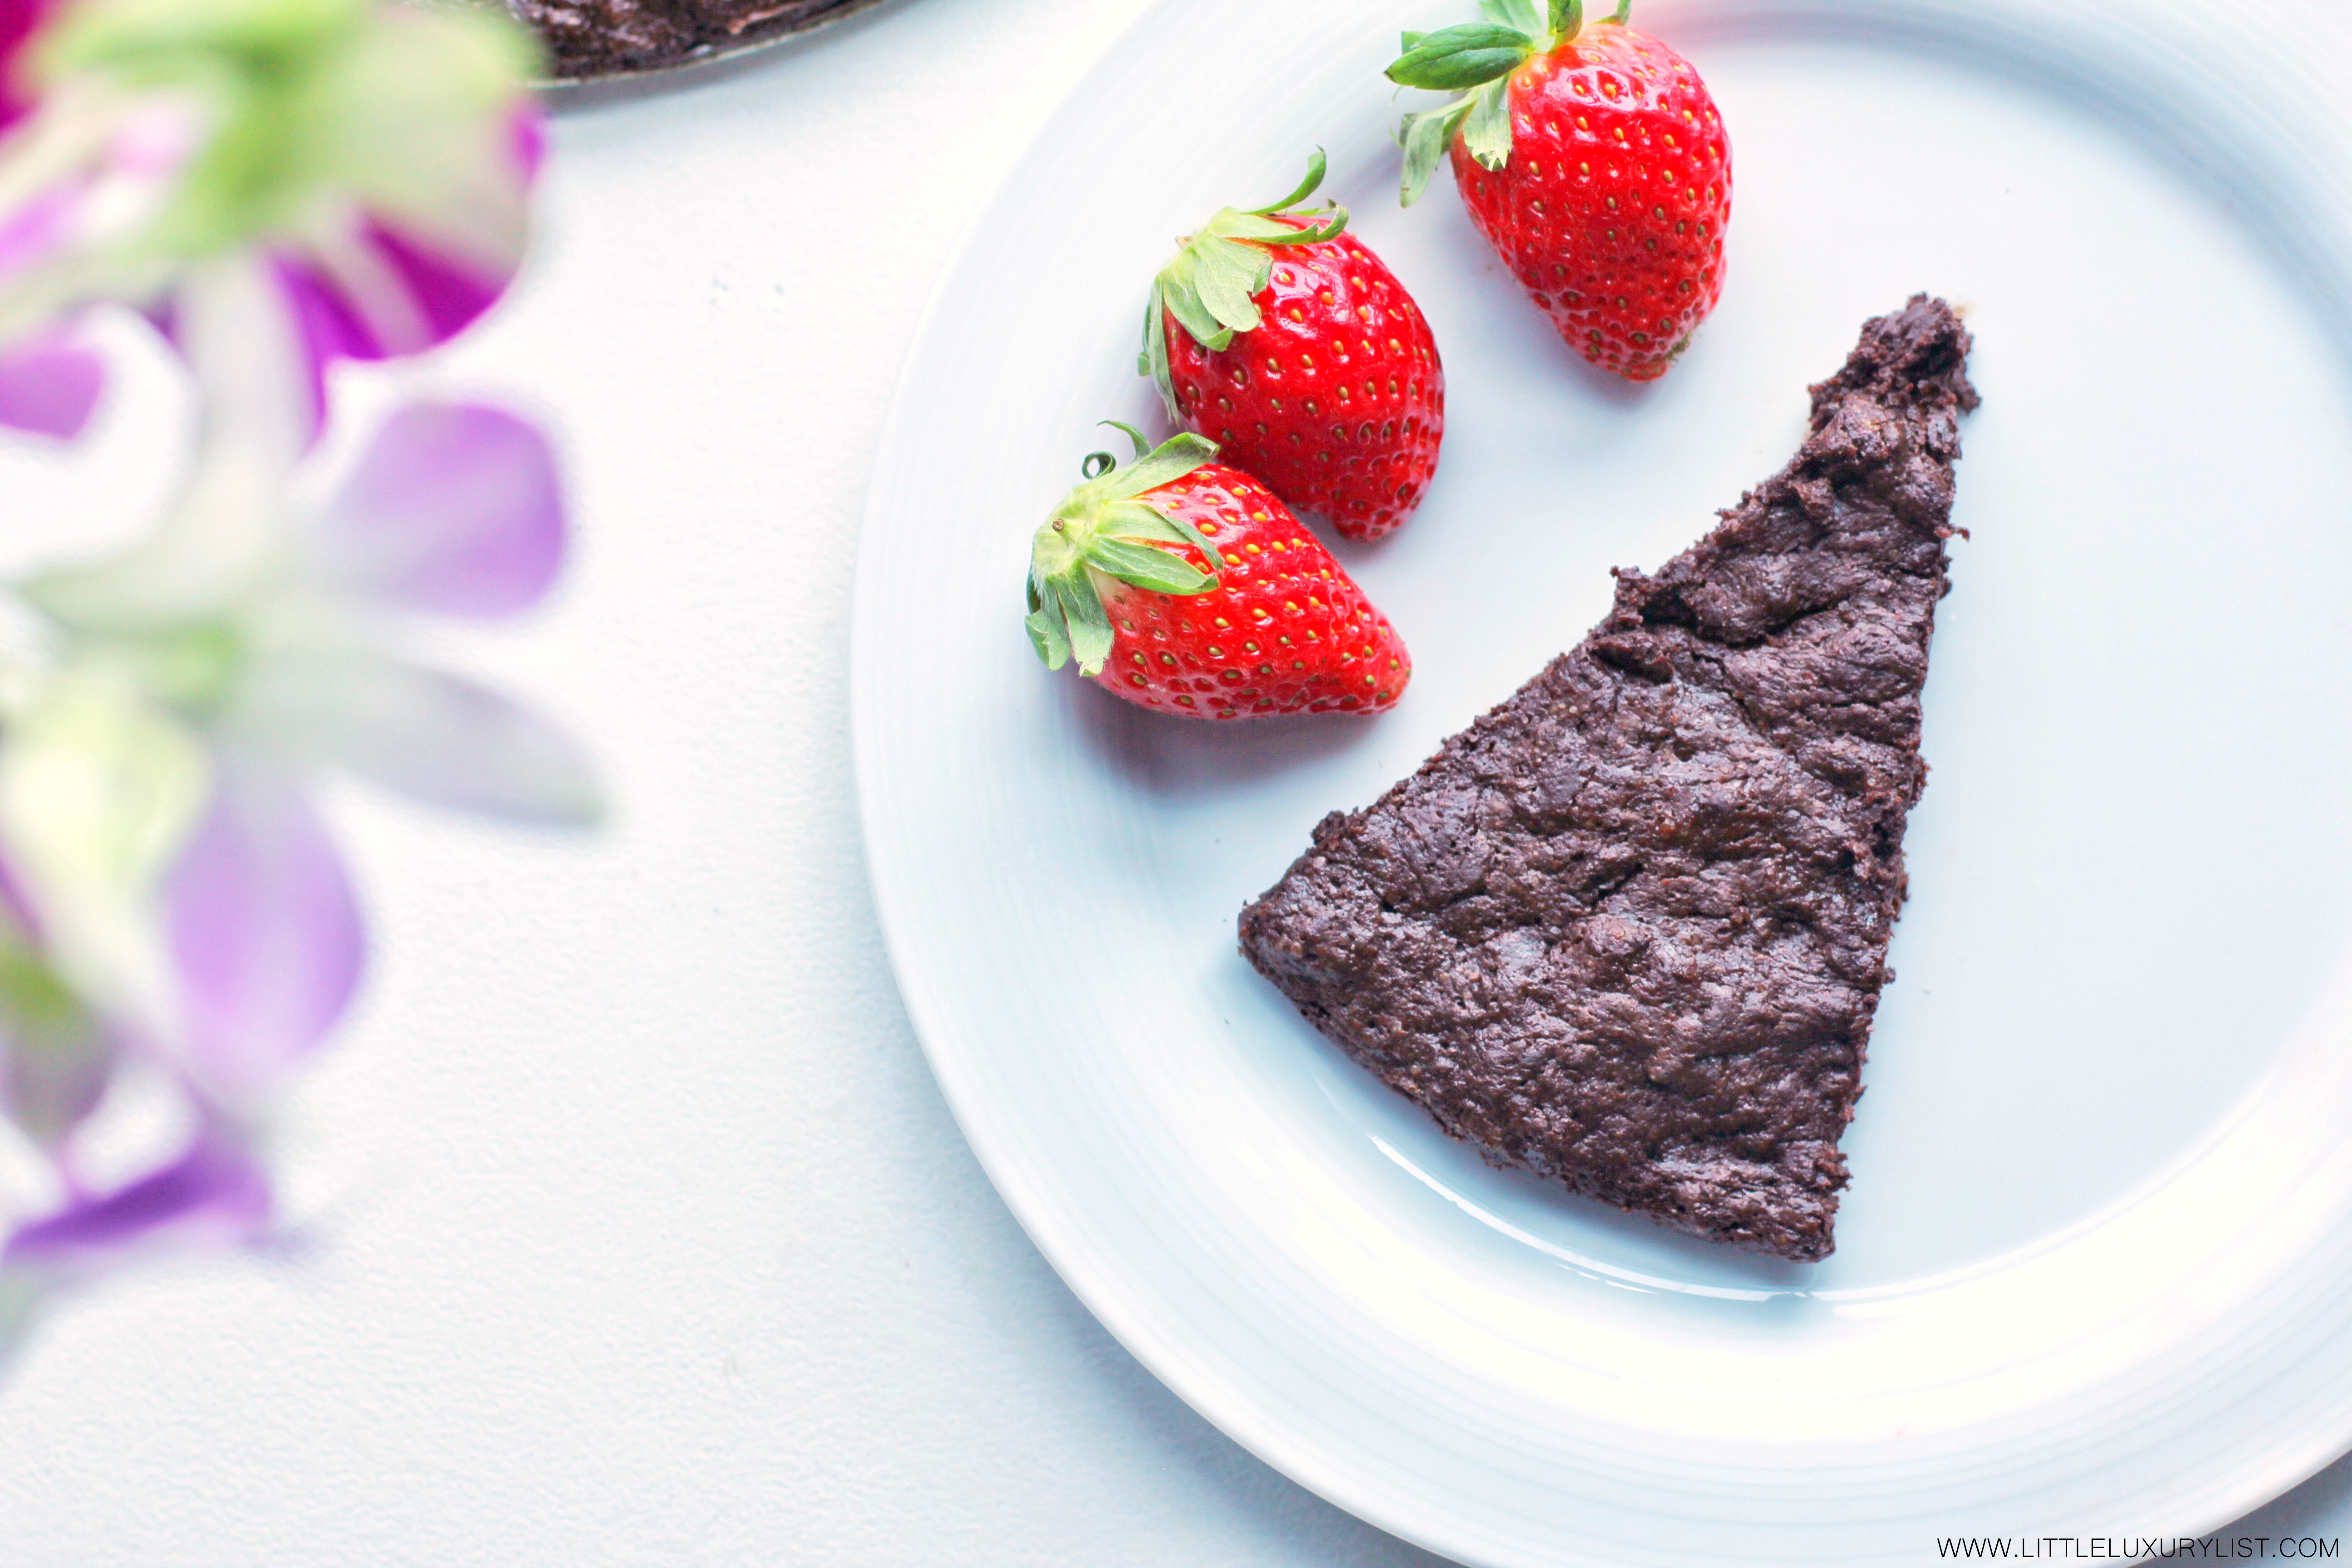 Flourless chocolate cake with strawberries by little luxury list